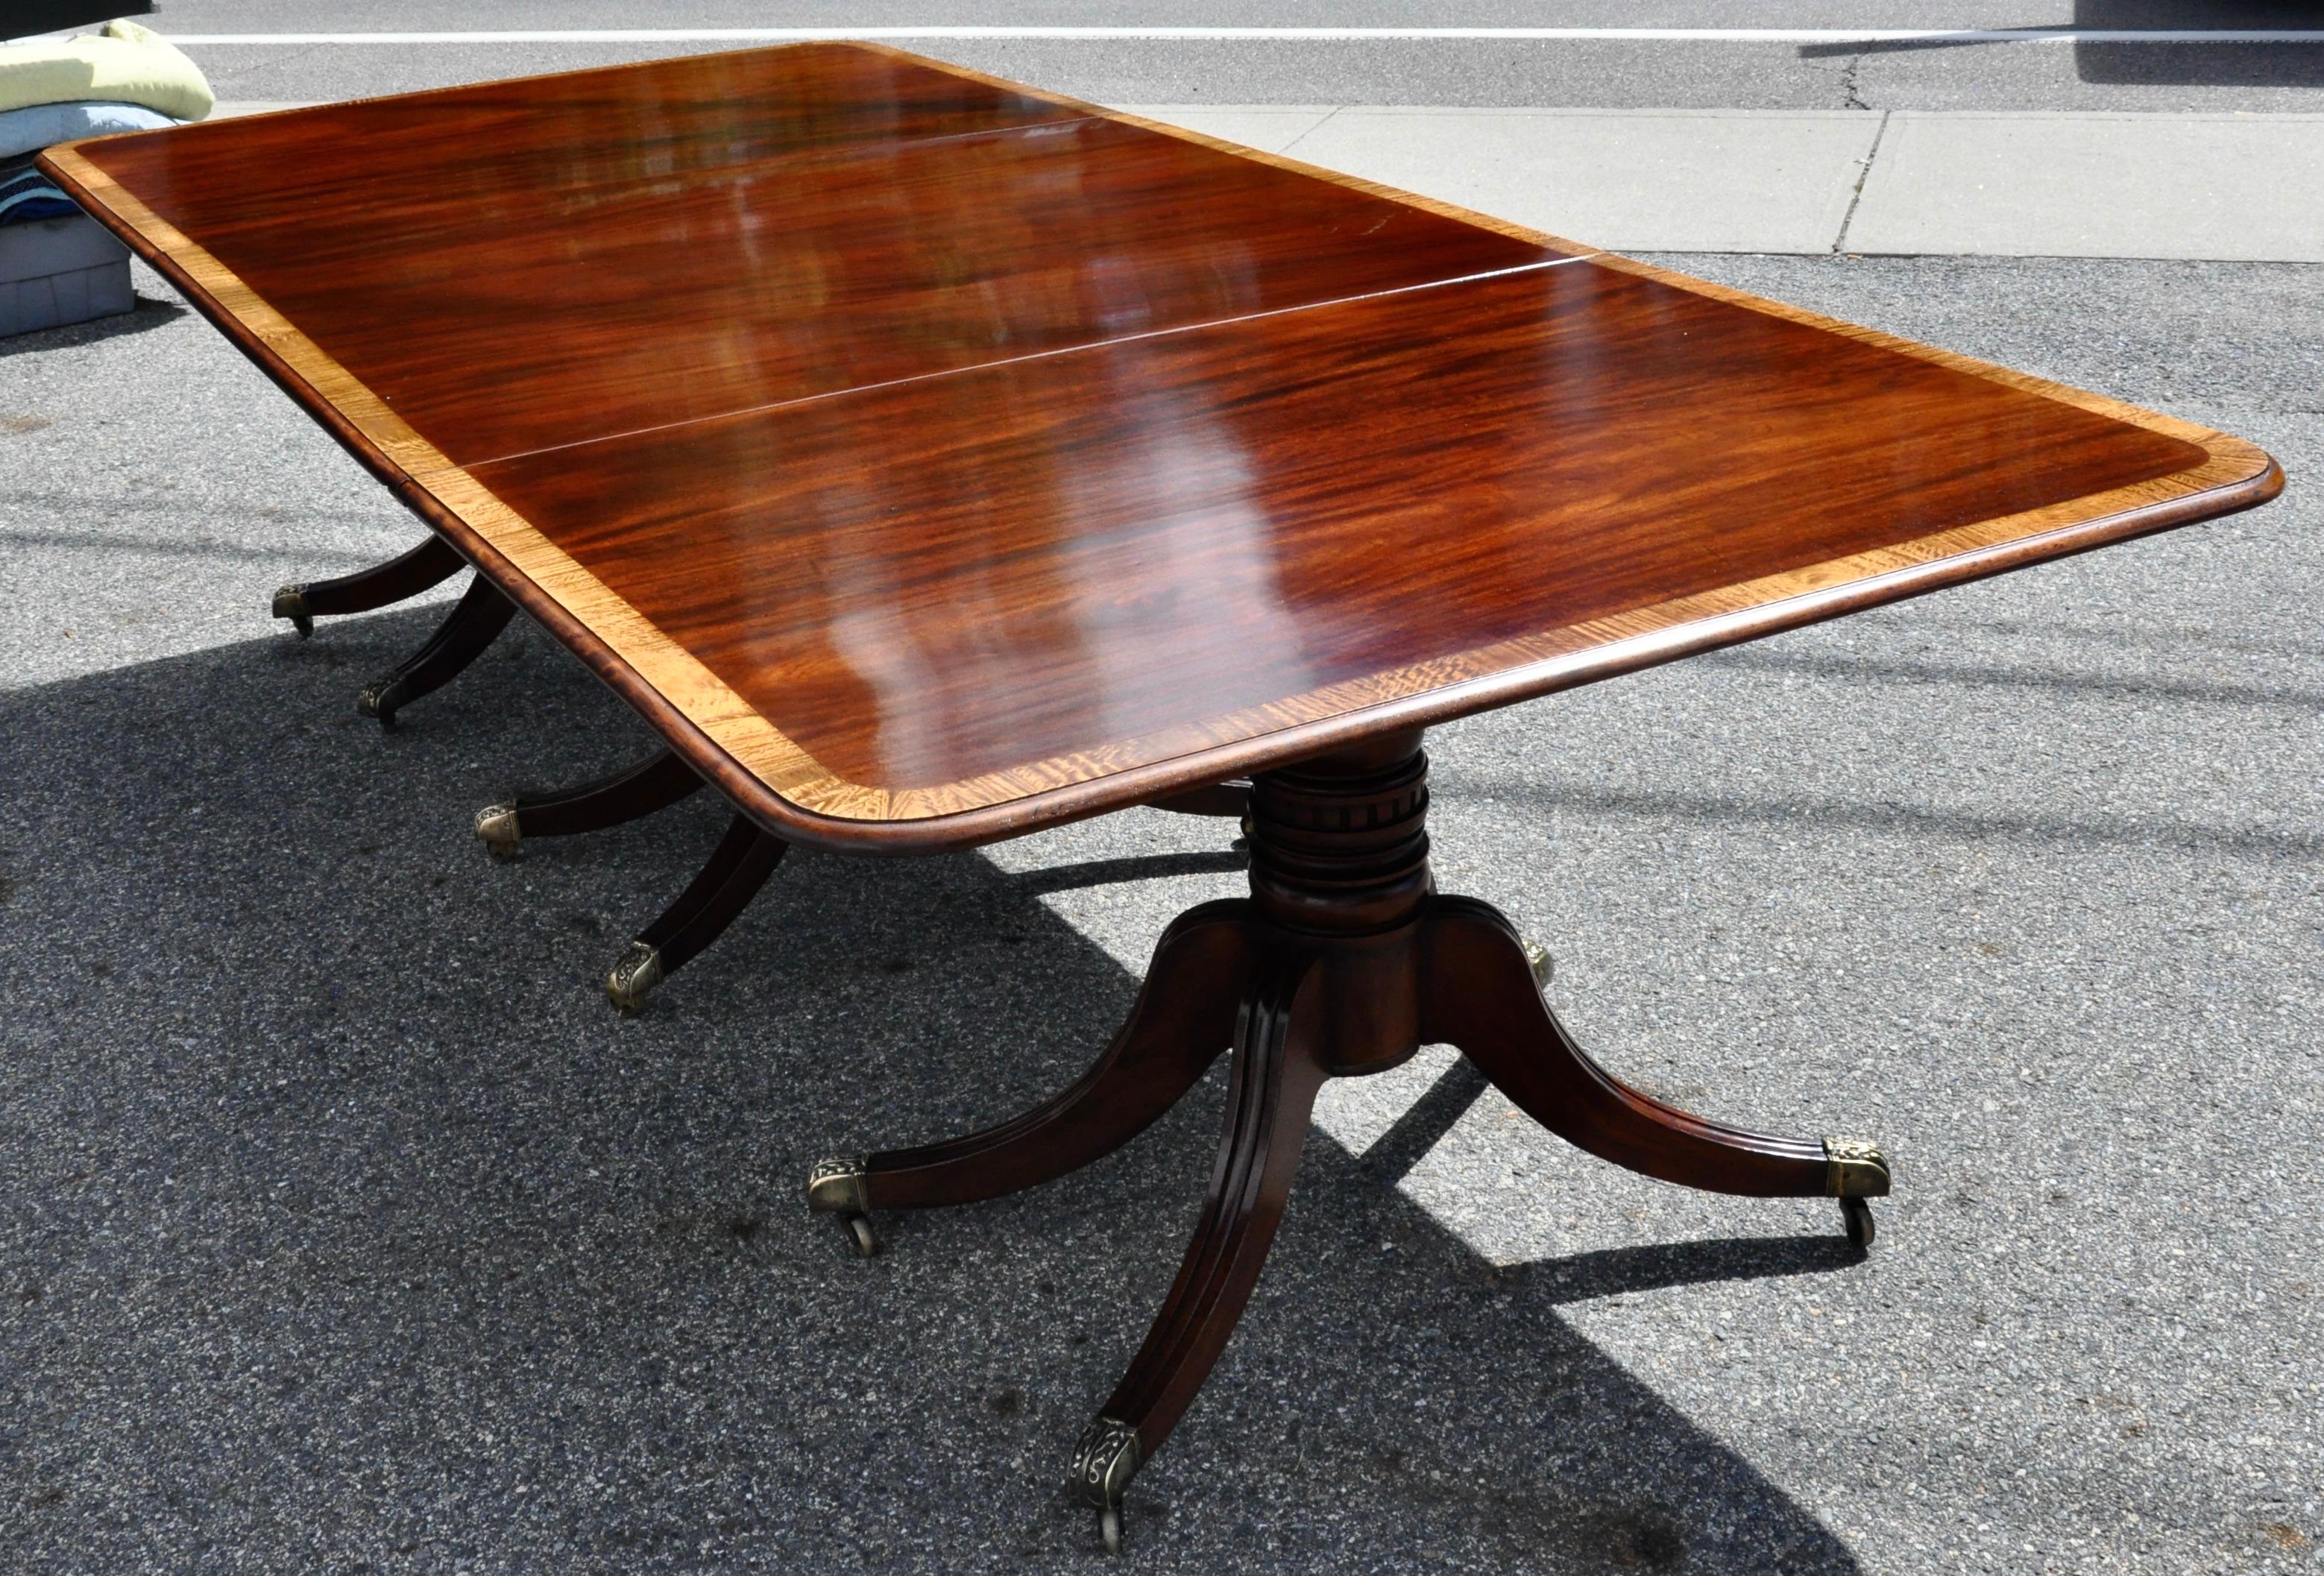 19th Century Period Regency Mahogany Triple Pedestal Dining Table with Satinwood Banding